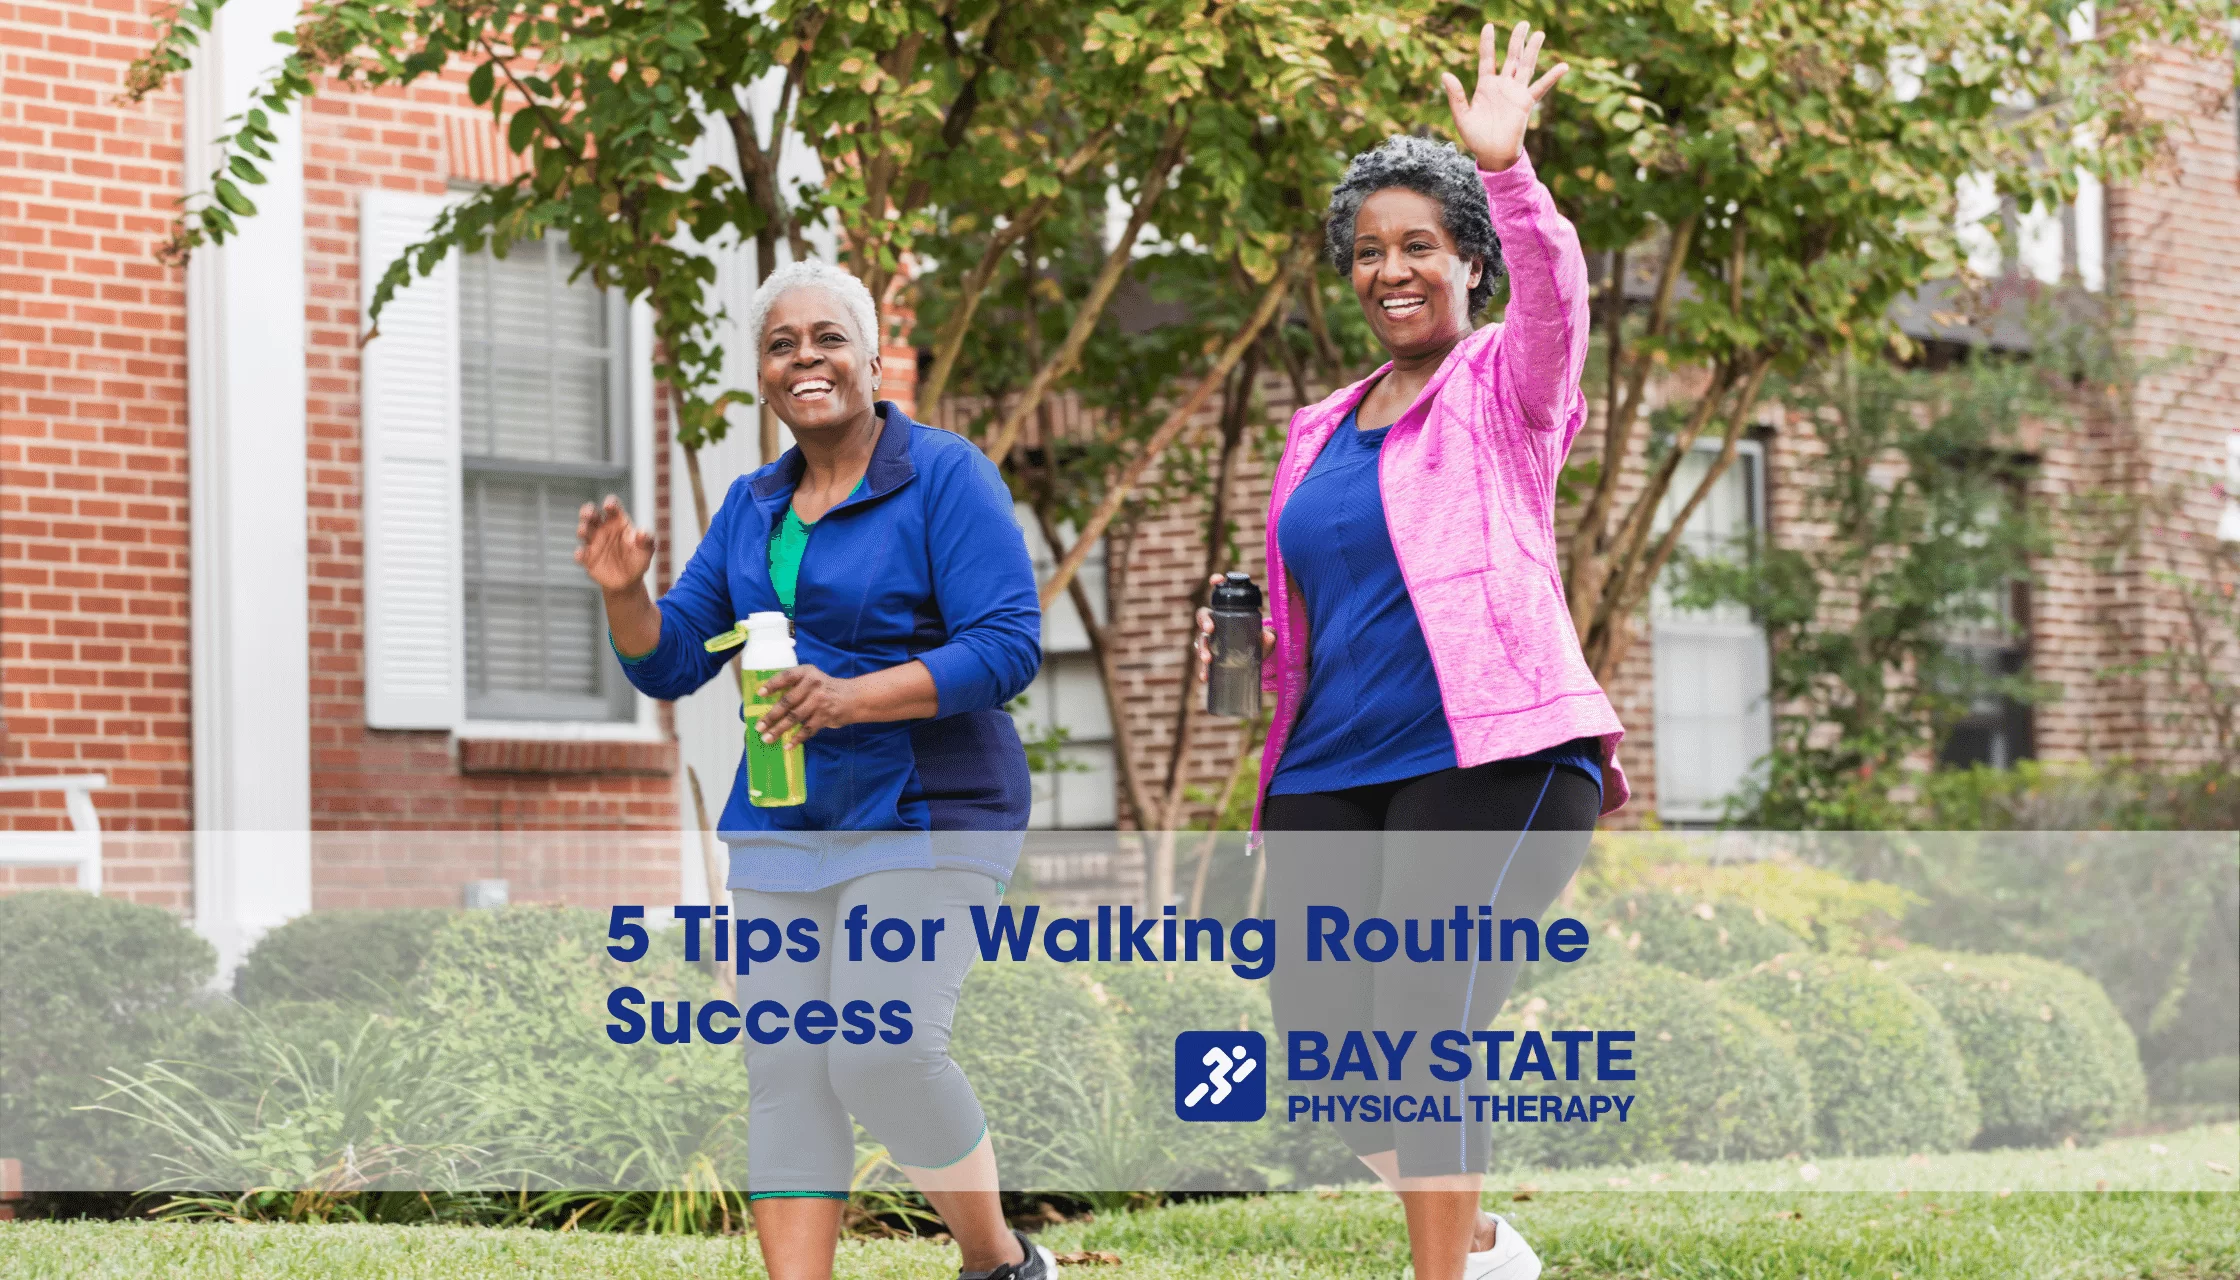 5 Tips for Walking Routine Success